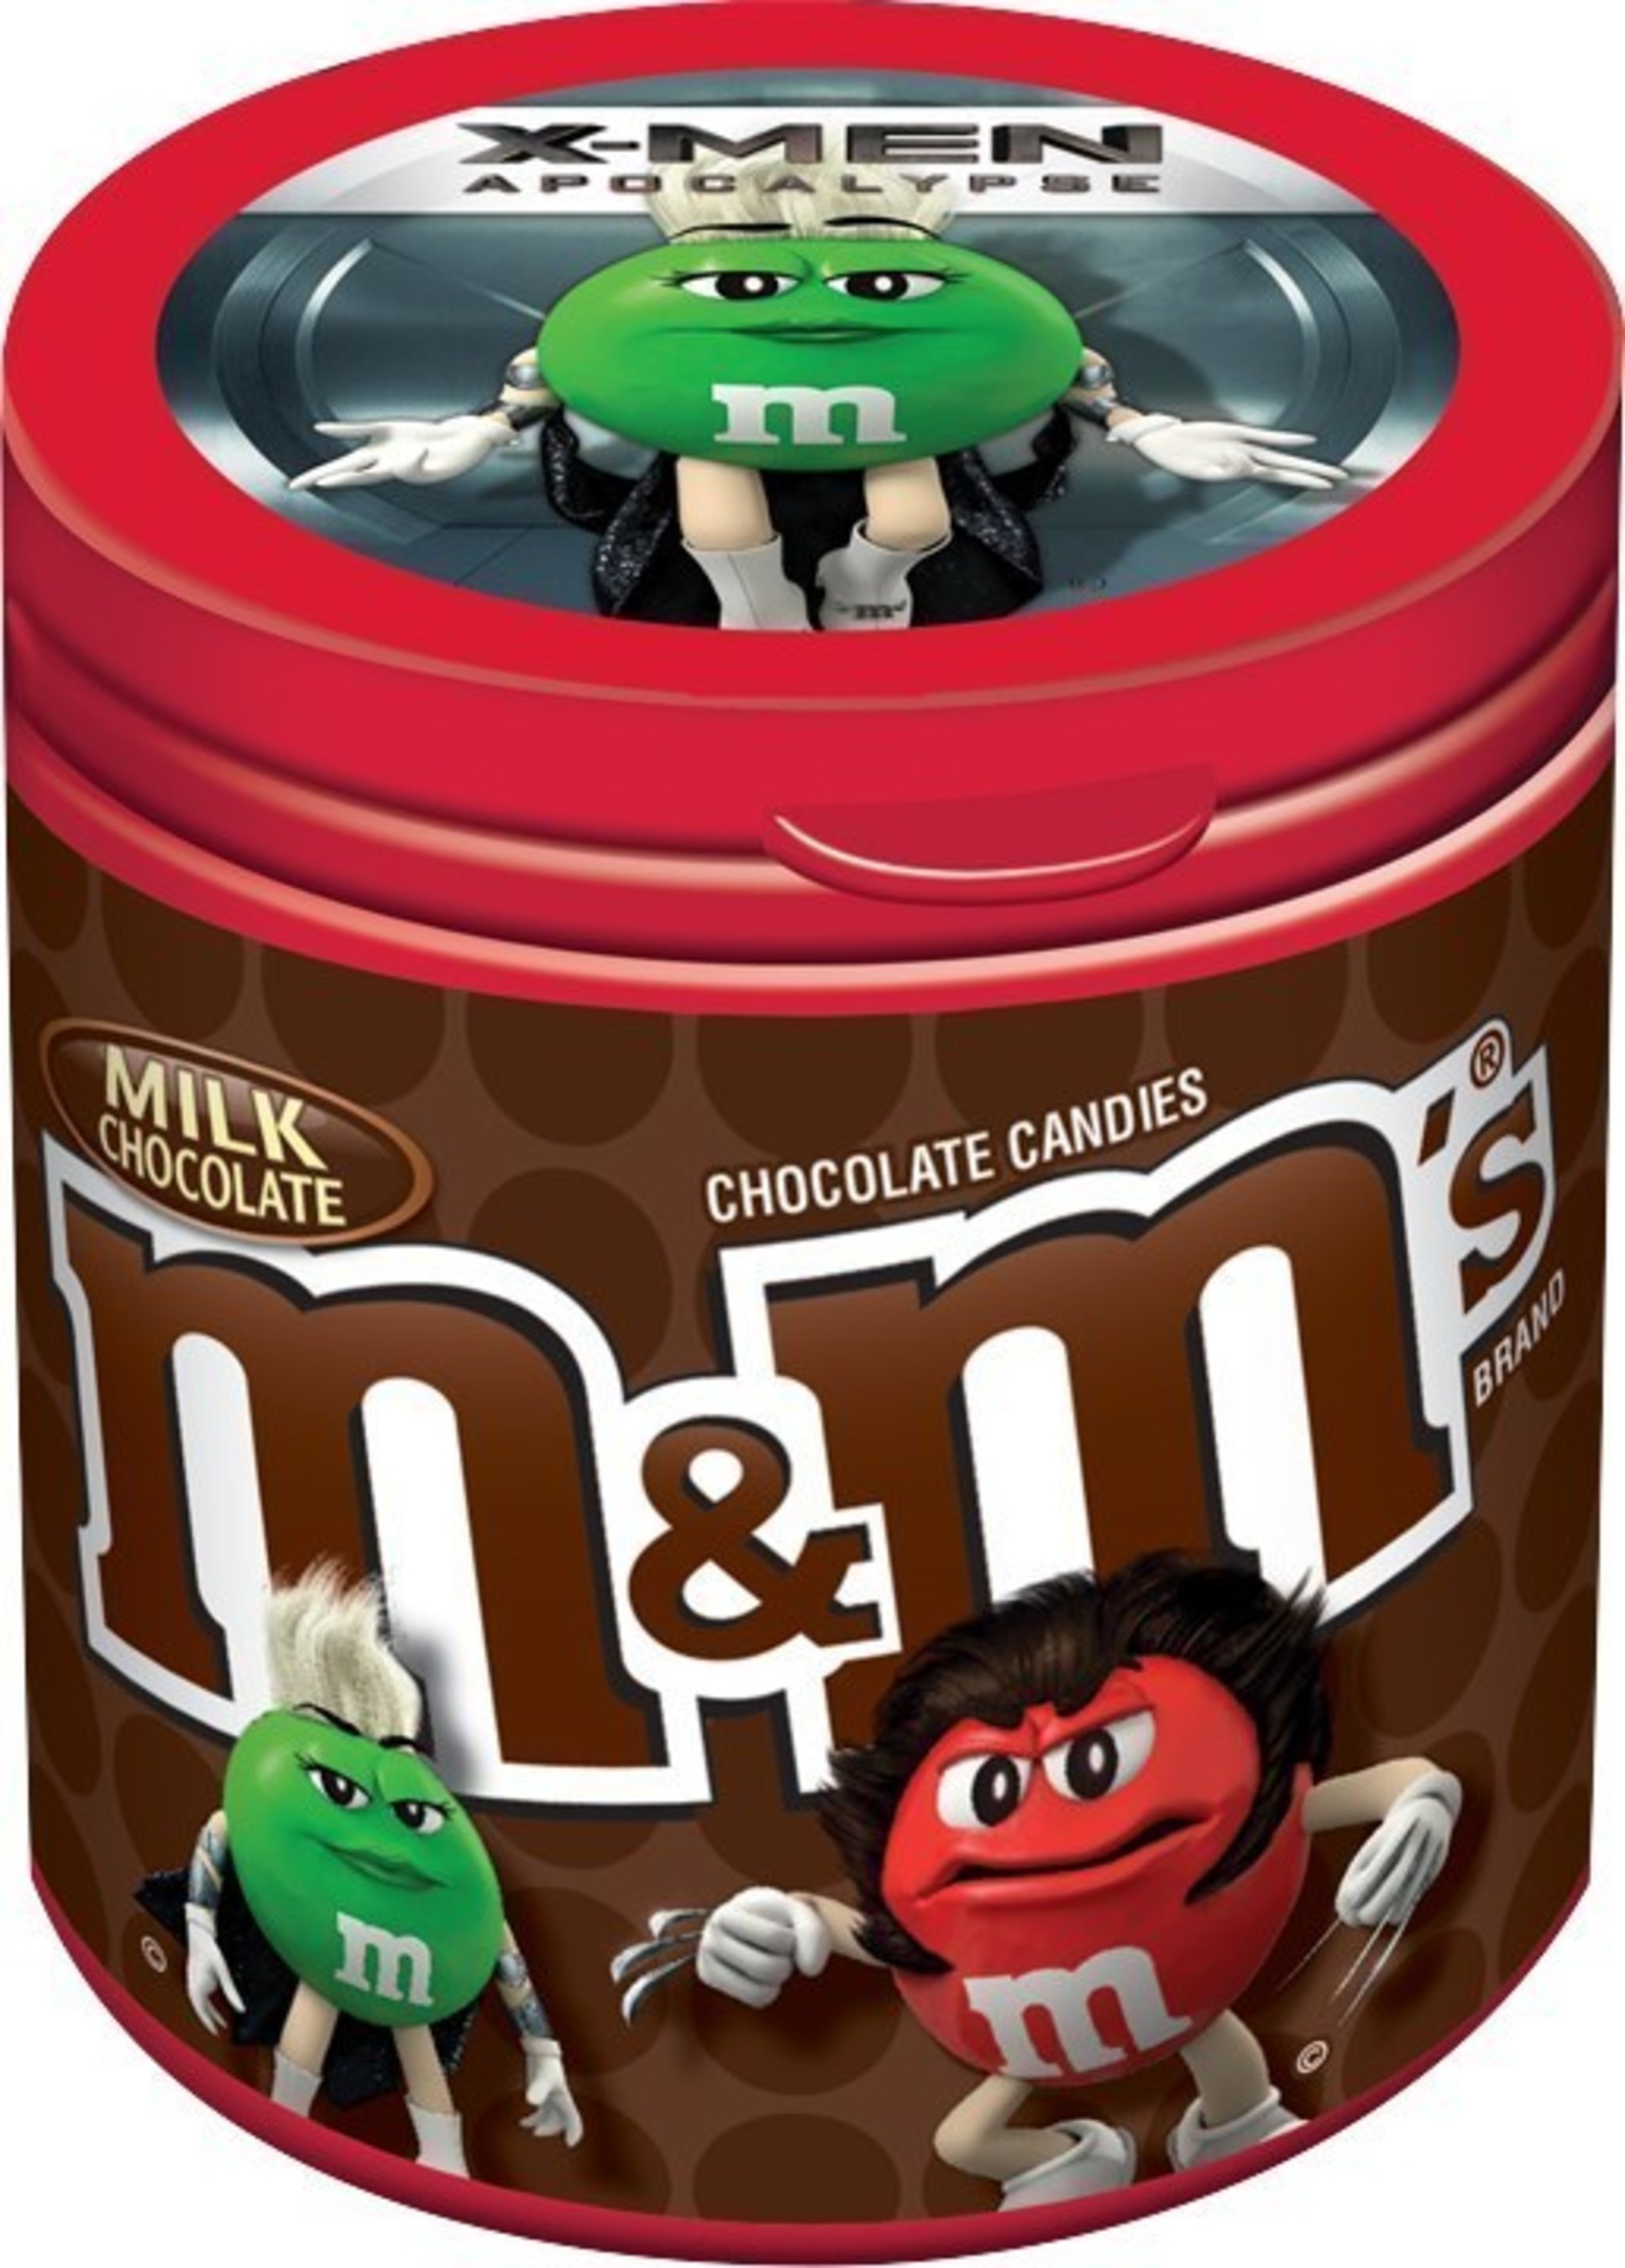 M&M'S is introducing X-Men-themed merchandise bottles featuring eight X-Men M&M'S character images. The new bottles will be available in early May at Walmart, Kroger, CVS and movie cinemas across the United States.